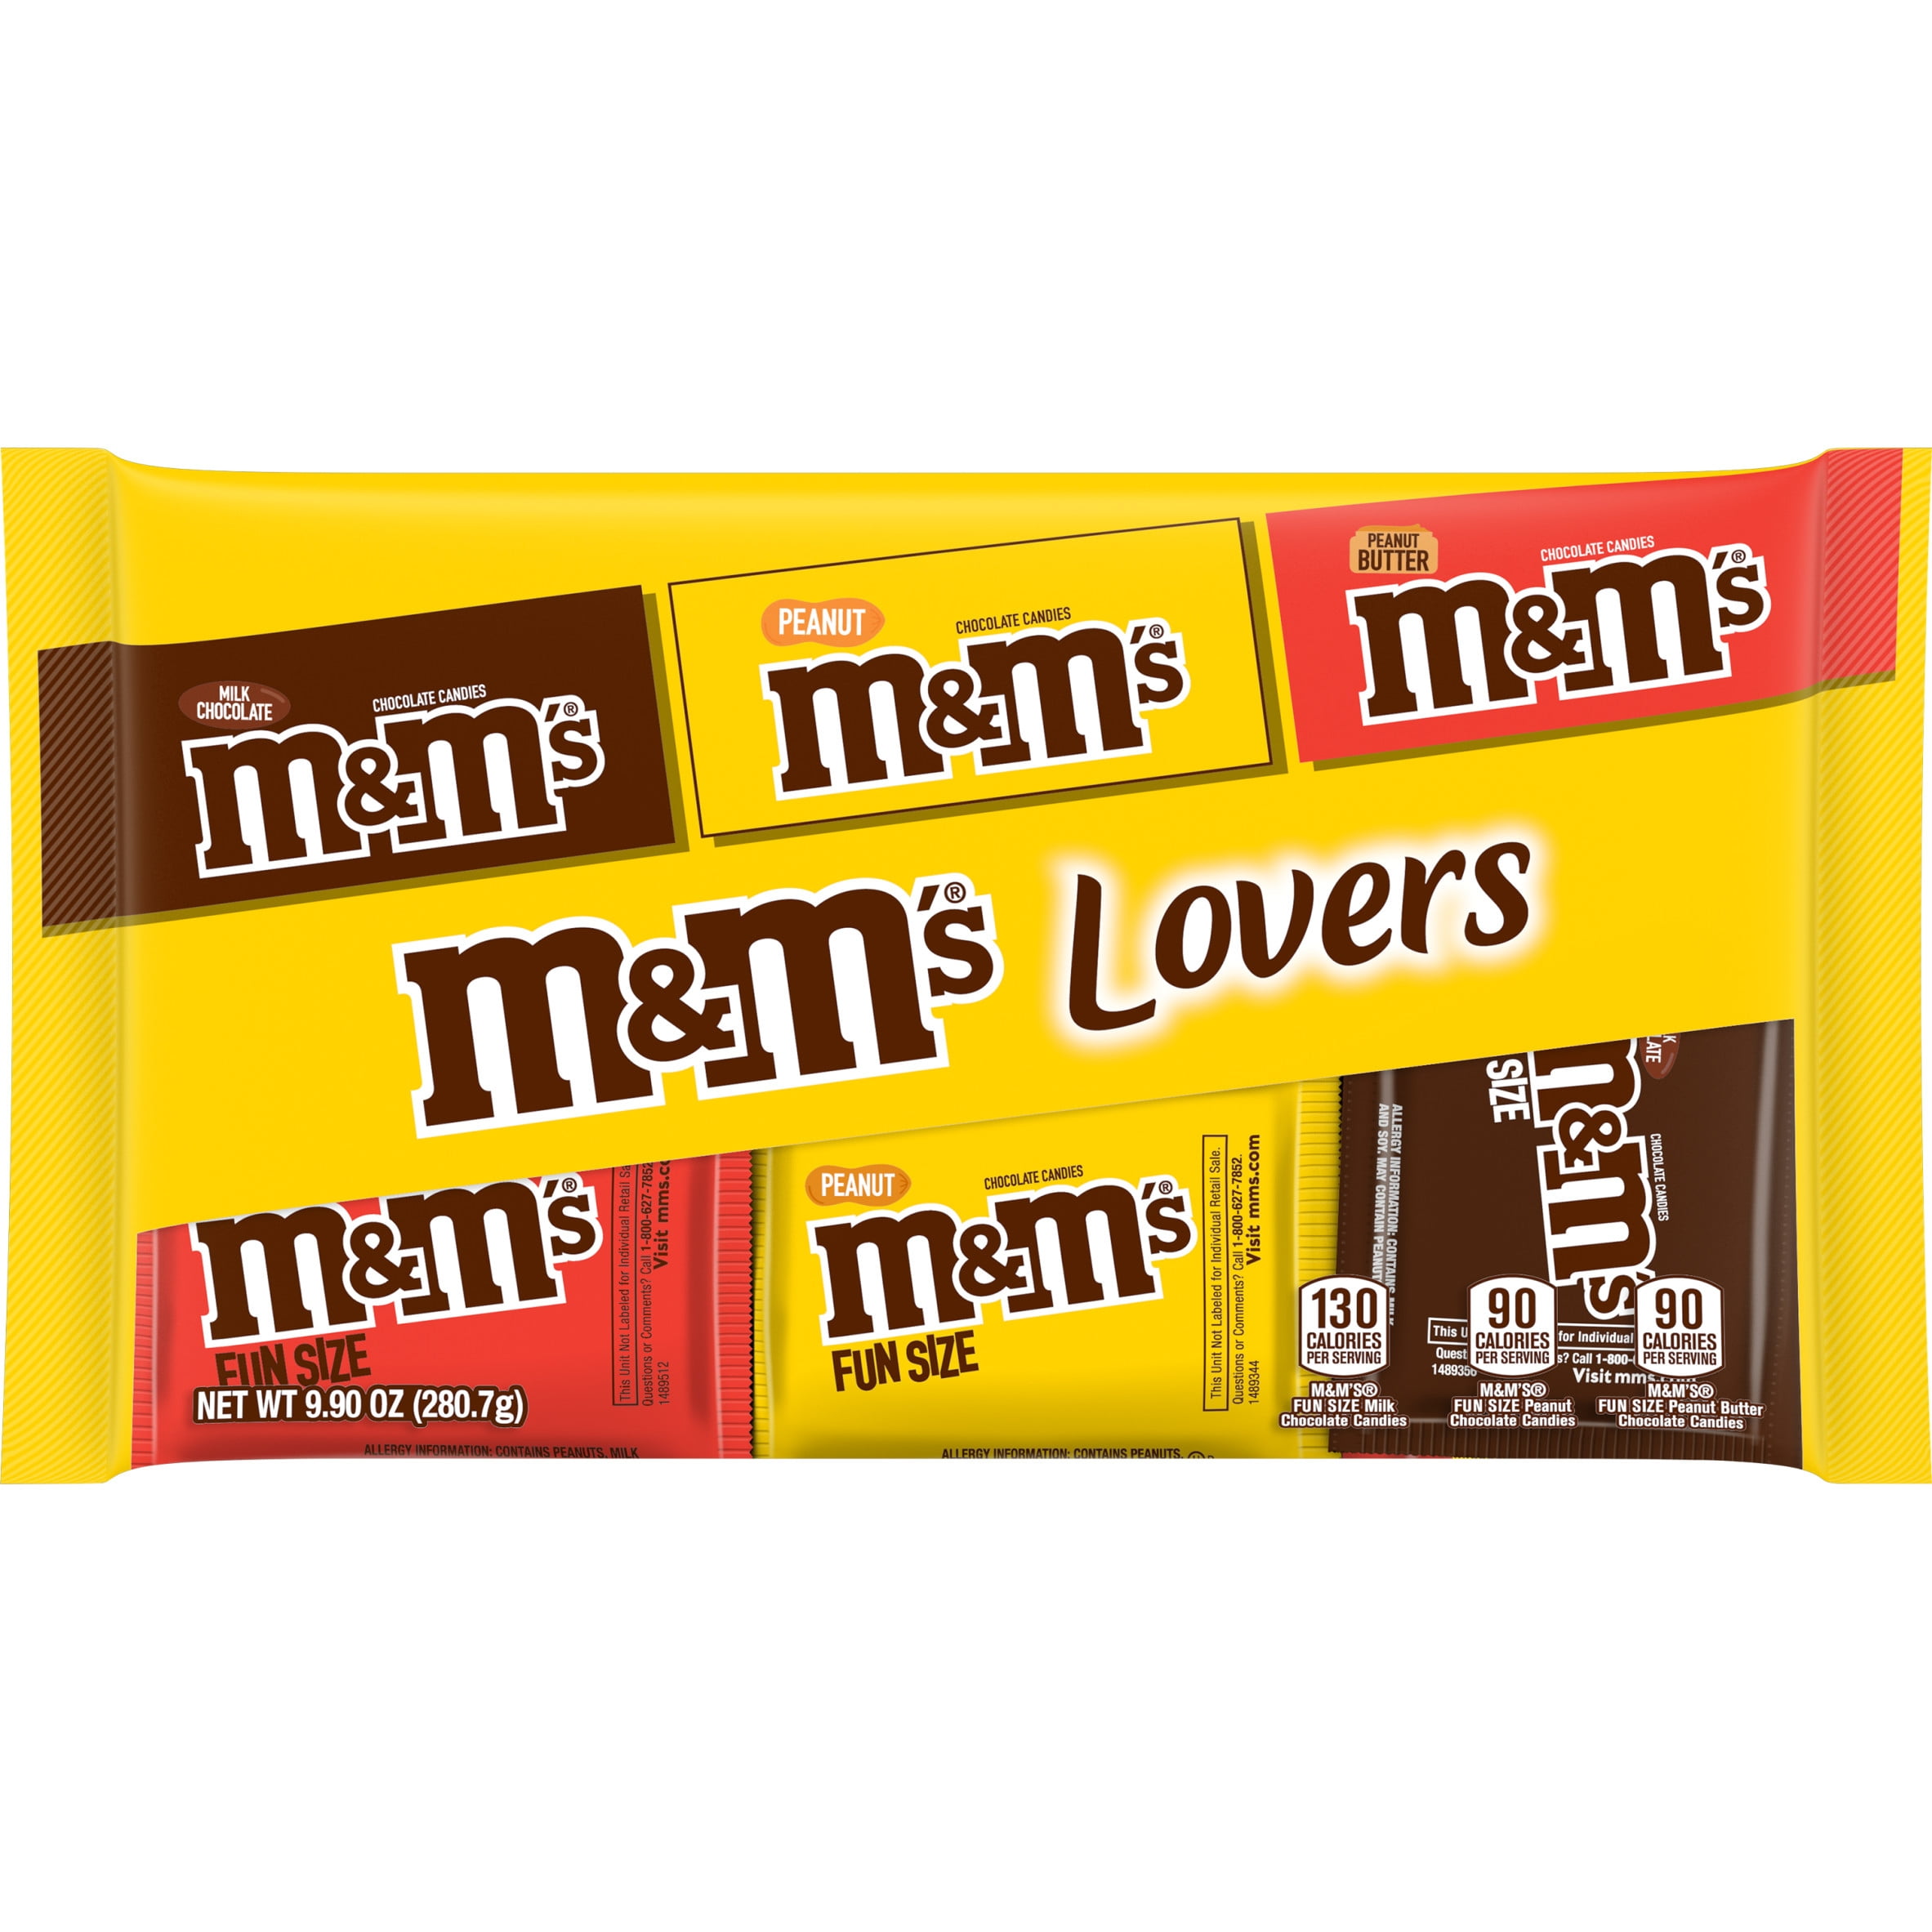 M&M'S VARIETY PACK CHOCOLATE CANDY SINGLE SIZE - 30.58oz - 18CT TO BOX